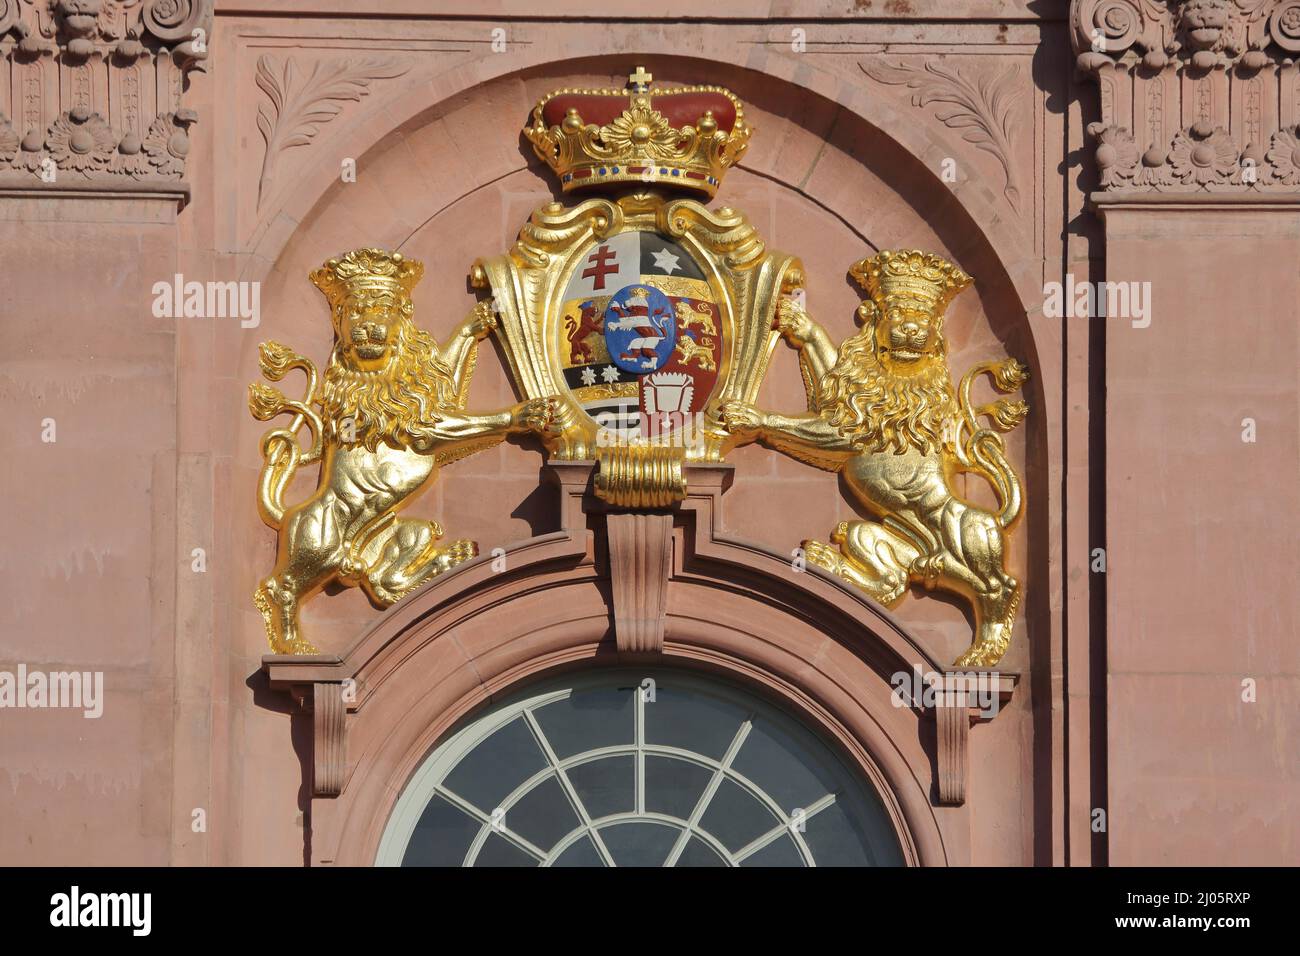 Golden coat of arms with two lions at the baroque residential palace in Darmstadt, Hesse, Germany Stock Photo